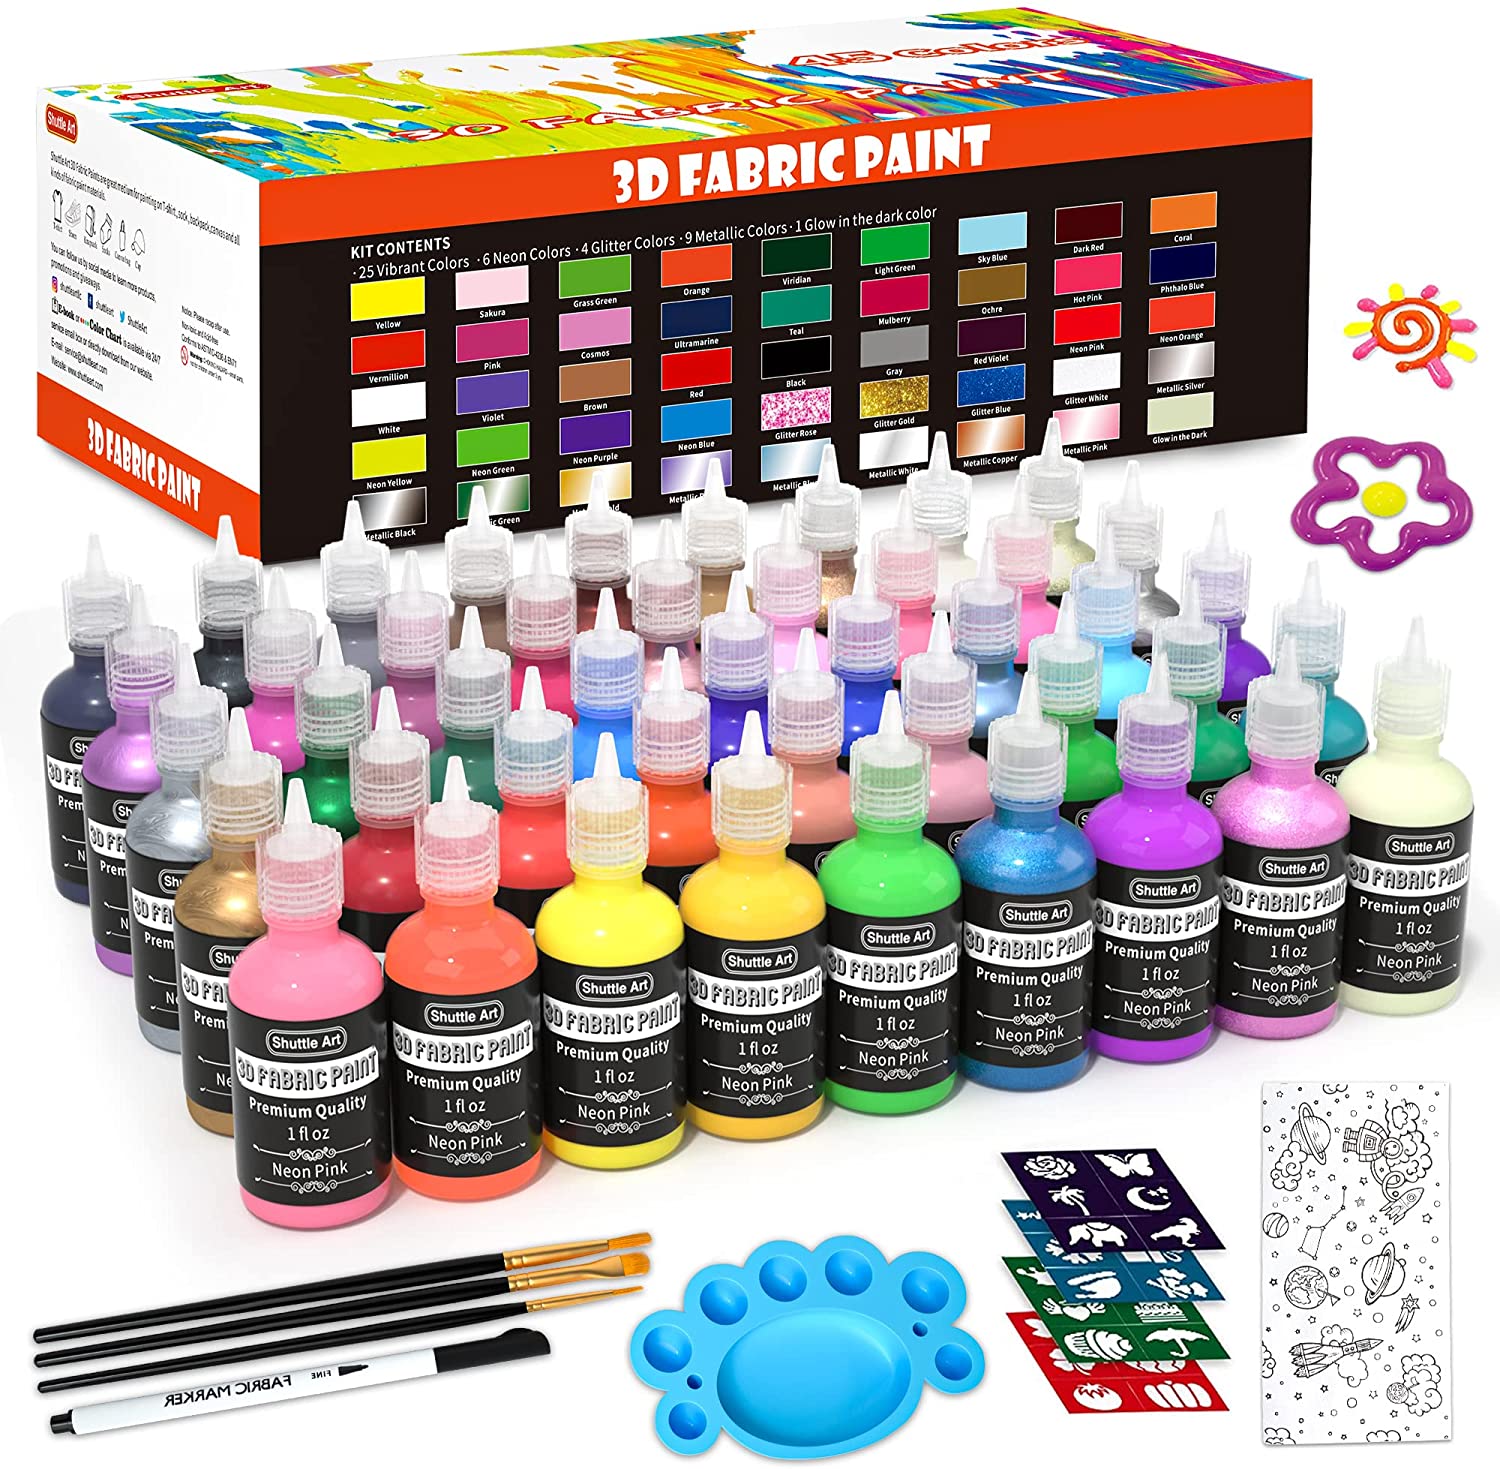 Shuttle Art Fabric Paint Set 45 Colors 3D Permanent Paint with Brushes Palette Fabric Pen Fabric Sheet Stencils Glow in The Dark Glitter Metallic